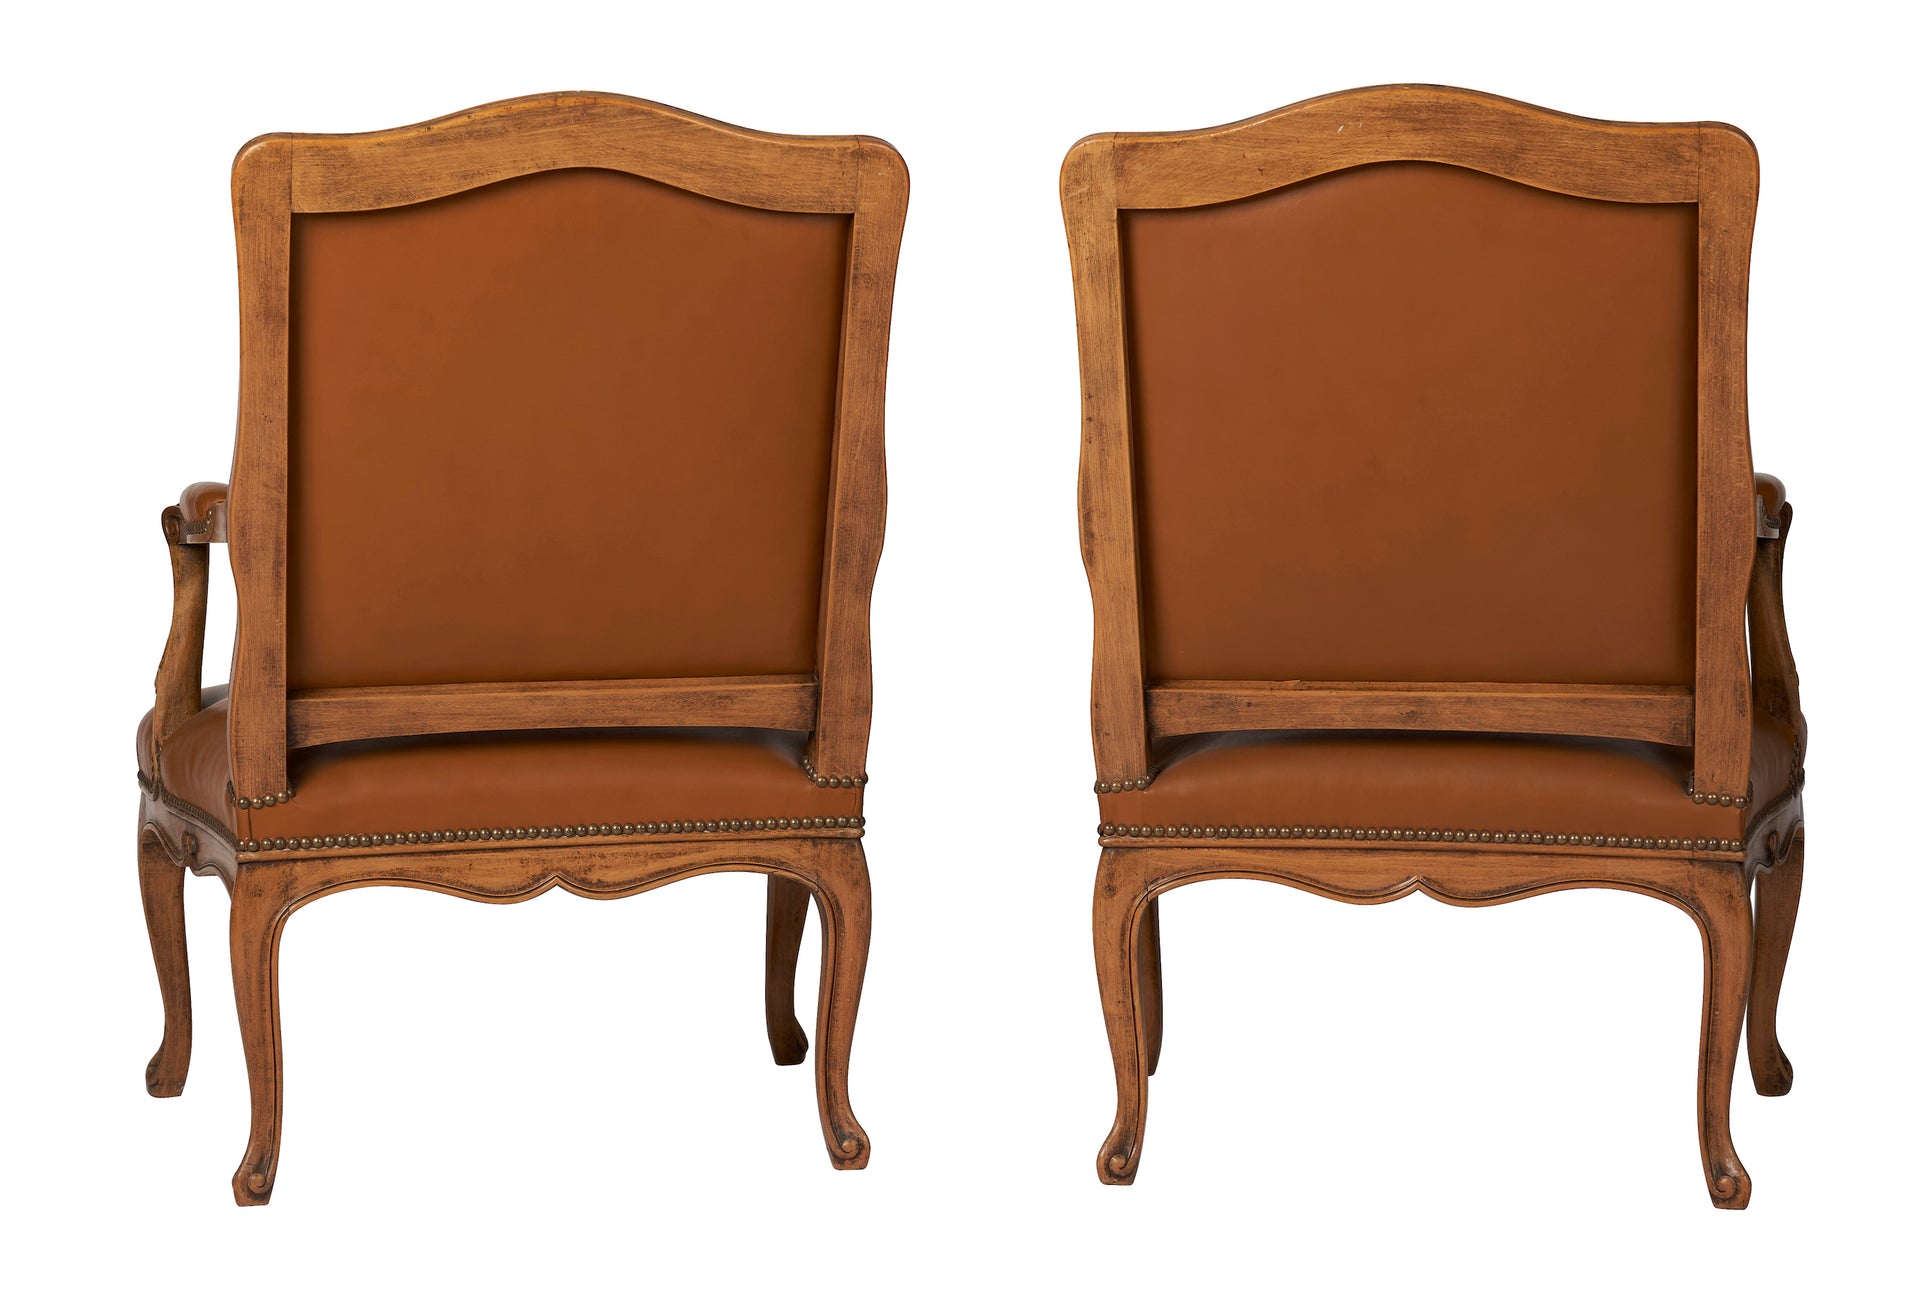 SOLD A pair of natural wood armchairs with flat backs, upholstered in tobacco leather, Louis XV Style French Circa 1920